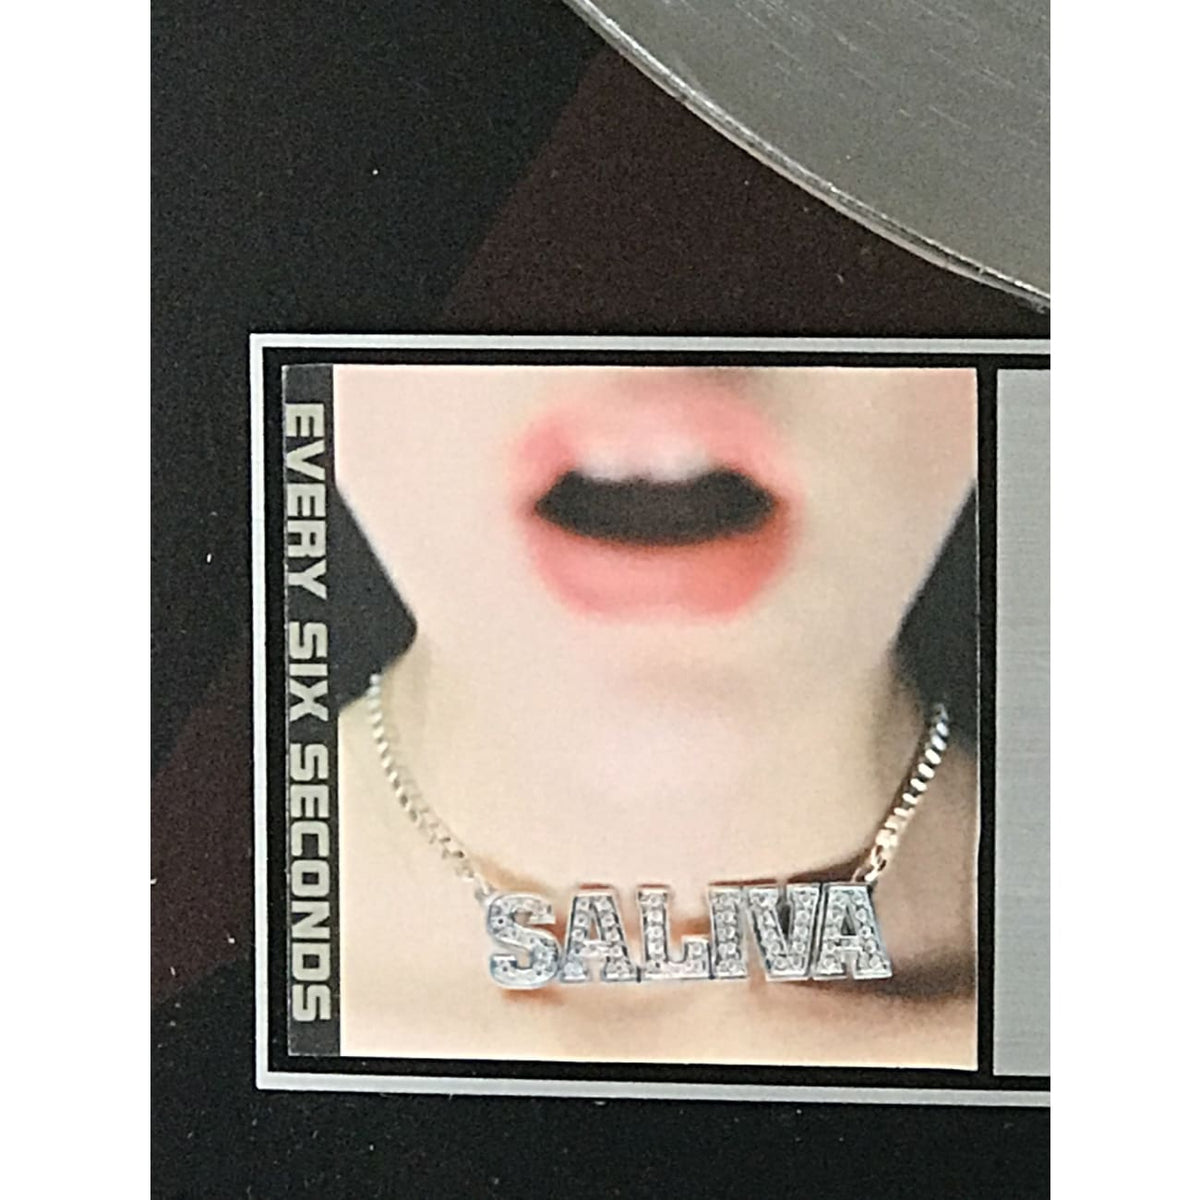 Saliva - New Saliva album coming 9/8 on Megaforce Records. You can  pre-order your digital copy or get physical cds, vinyls, and other merch at  our Saliva online store. Links in first